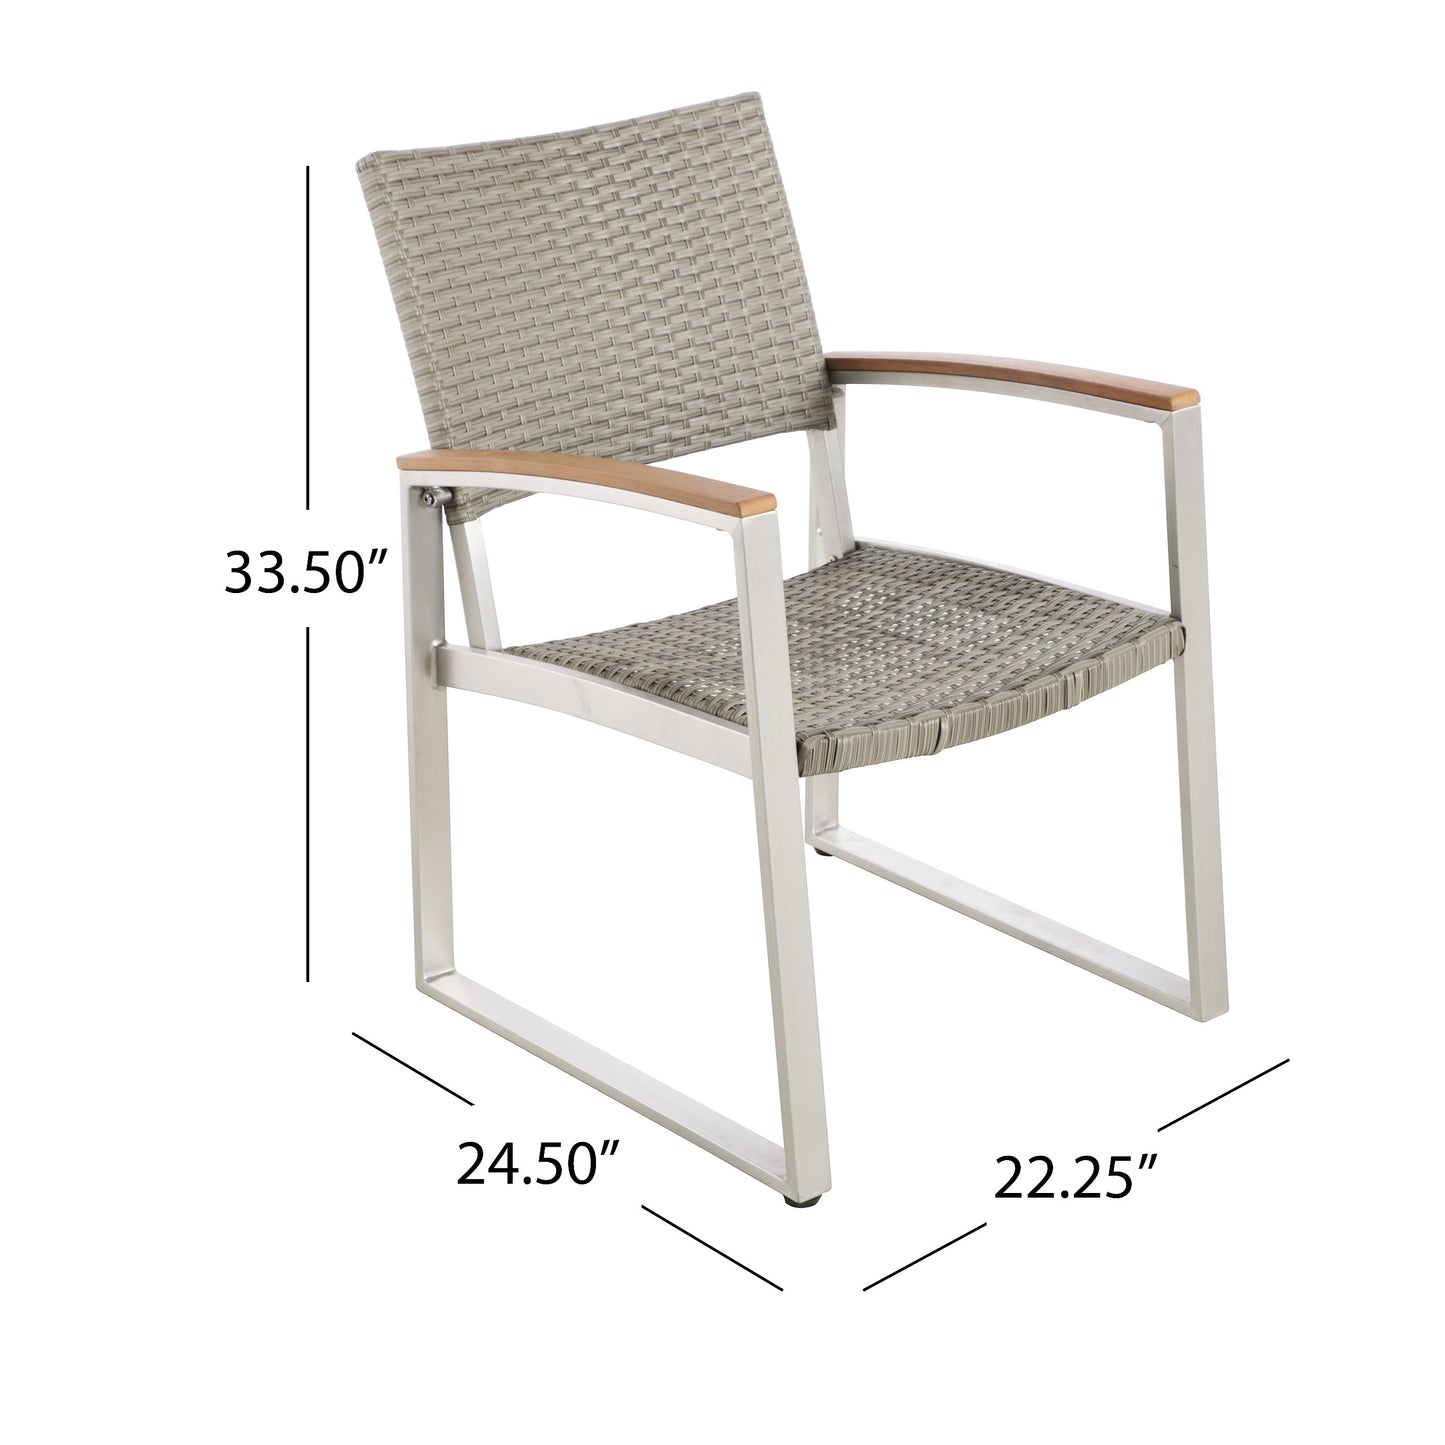 Eunice Outdoor 2 Seater Aluminum and Wicker Chat Set